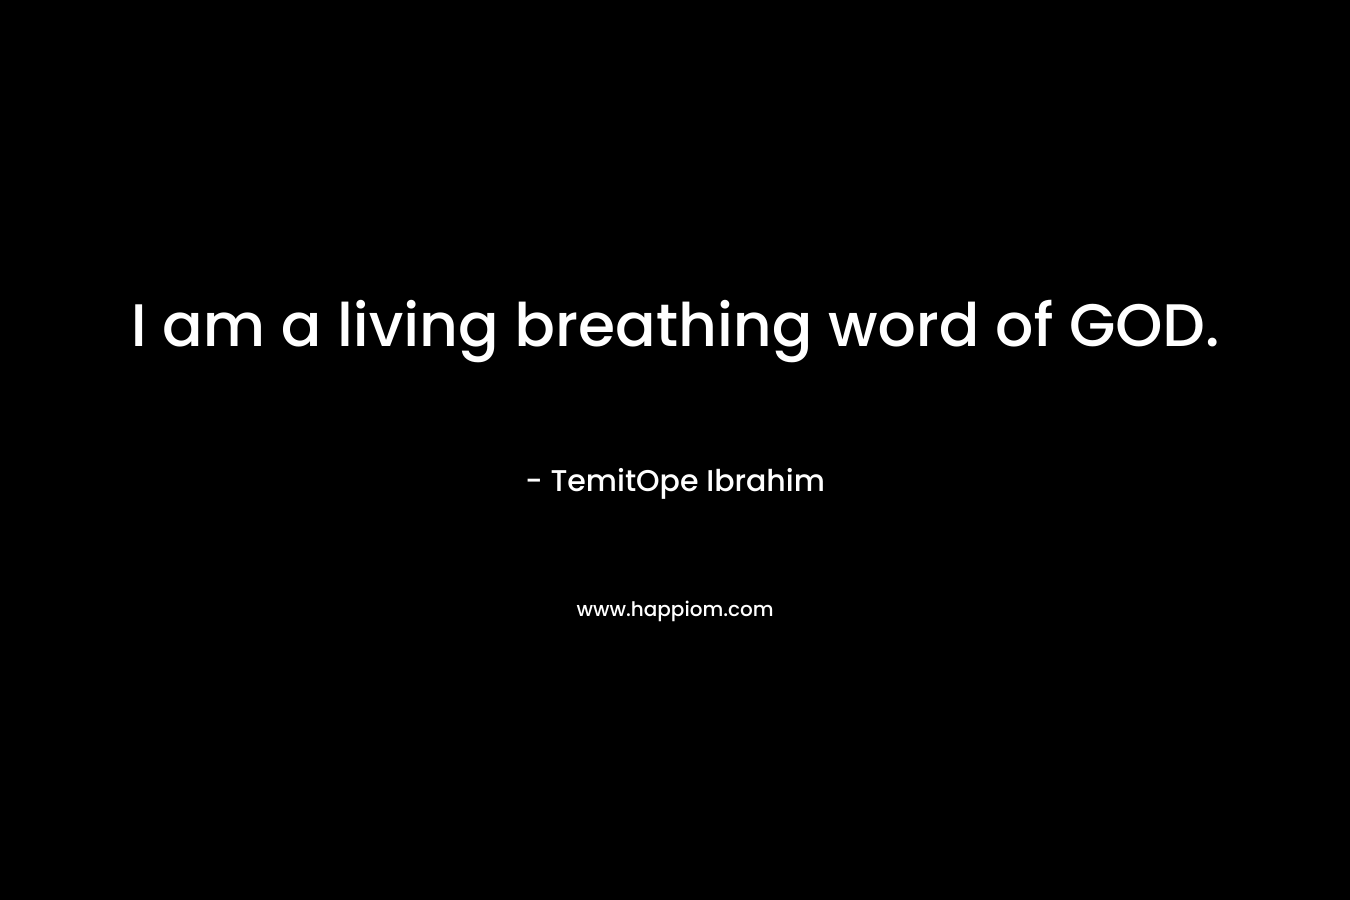 I am a living breathing word of GOD.